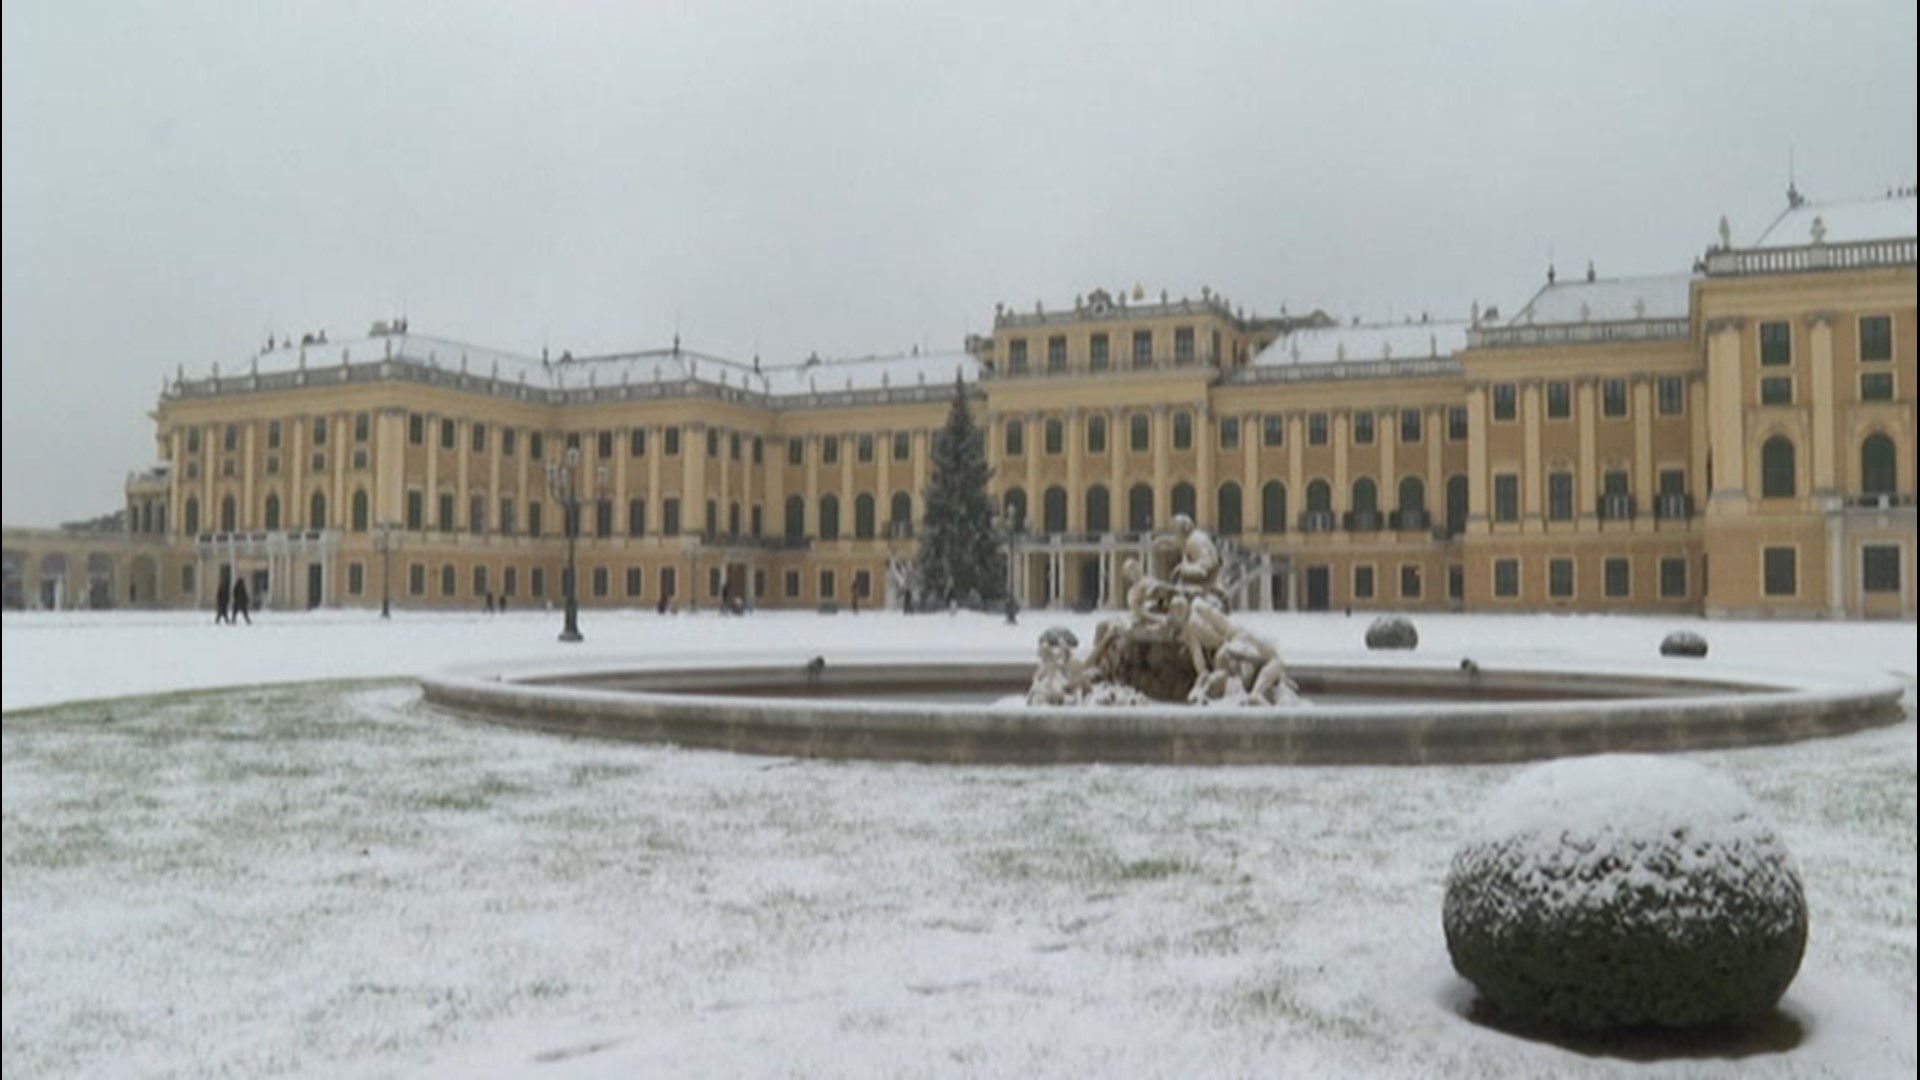 It's beginning to look a lot like the holidays in Vienna, Austria. The capital city saw its first snow fall on Dec. 3, covering the Christmas tree at Schönbrunn Palace with a light dusting of snow.